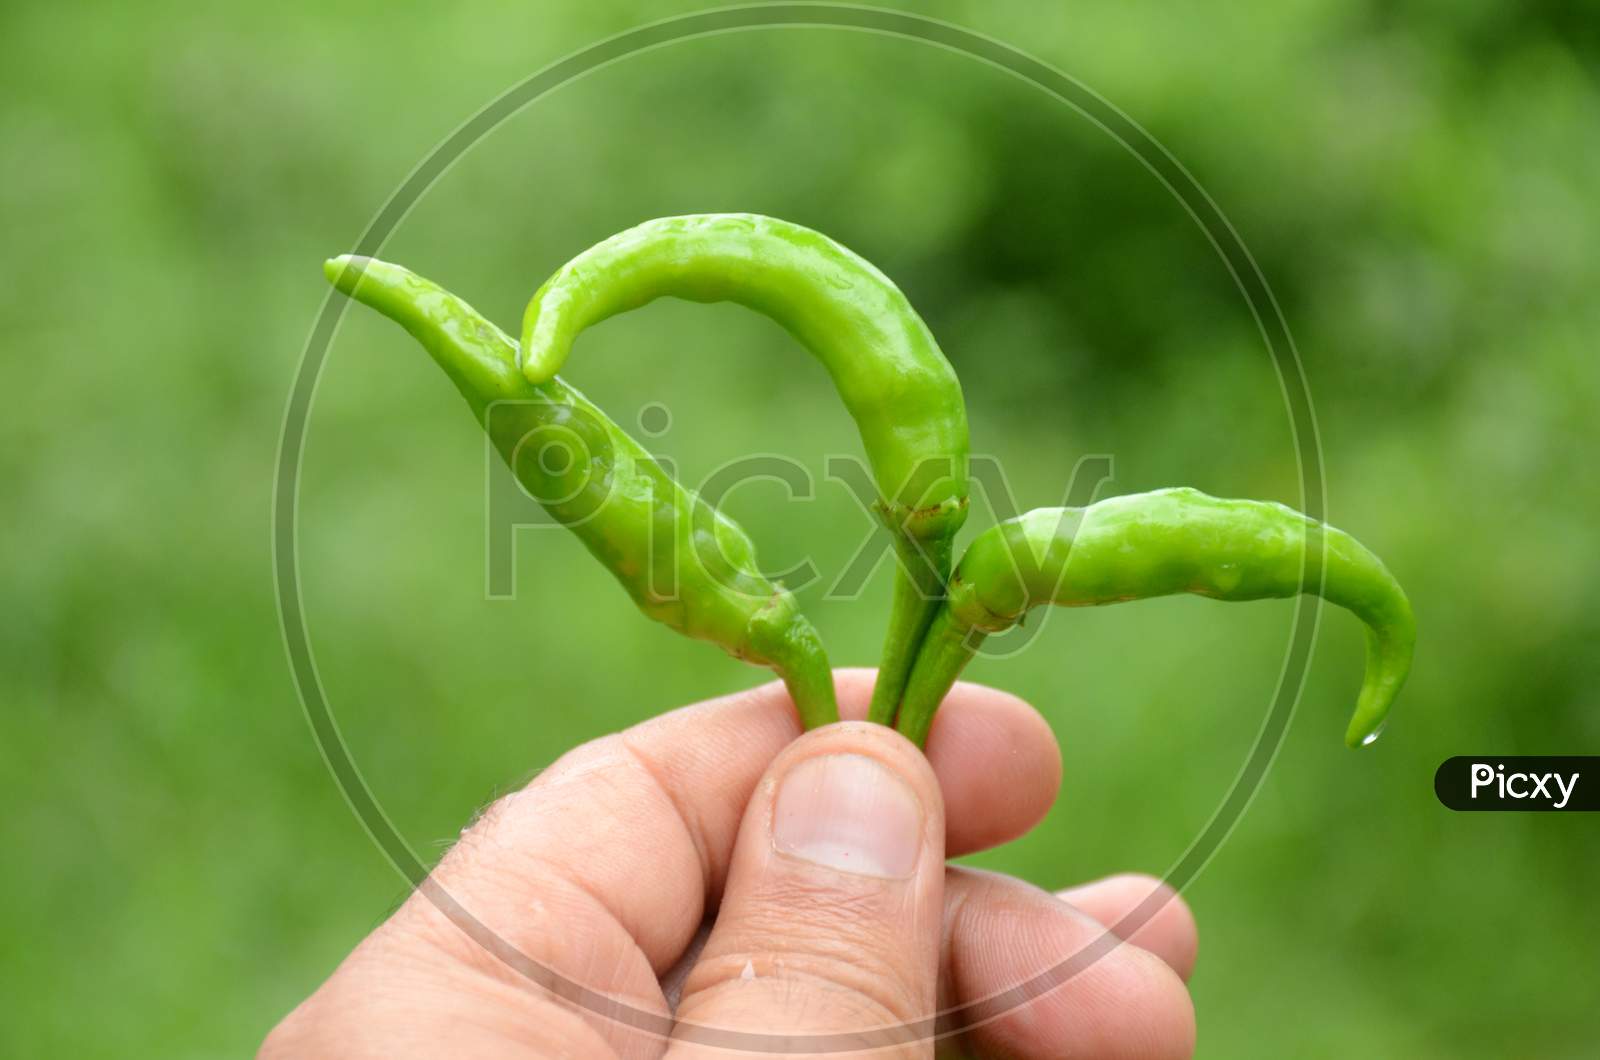 Closeup The Bunch Ripe Green Chilly Hold Hand Over Out Of Focus Green Background.